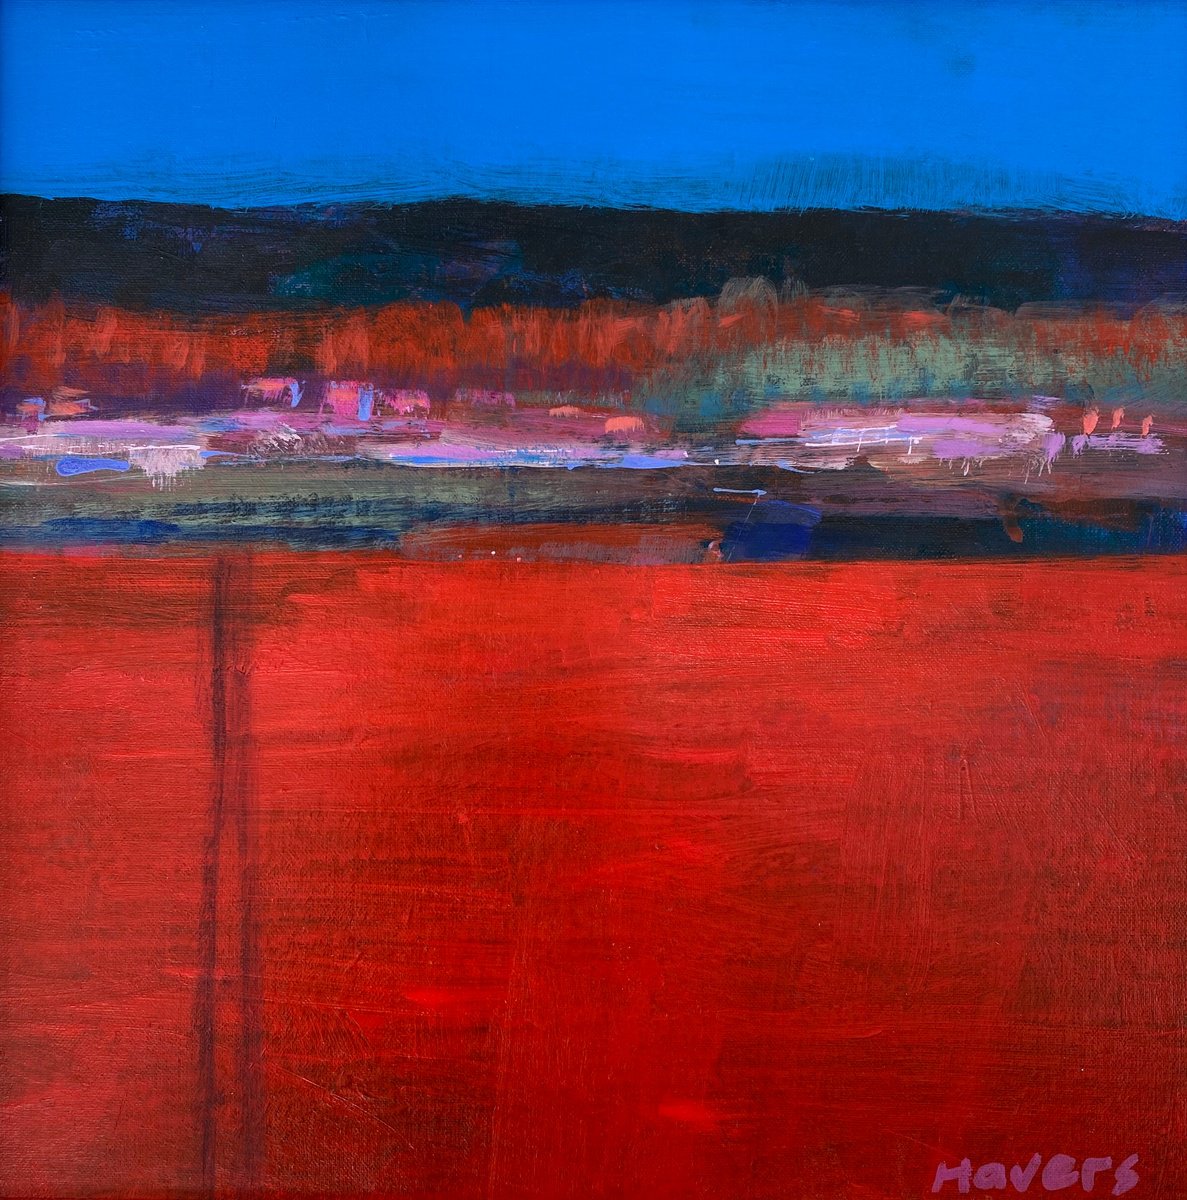 Blue Sky Red Land by Chrissie Havers